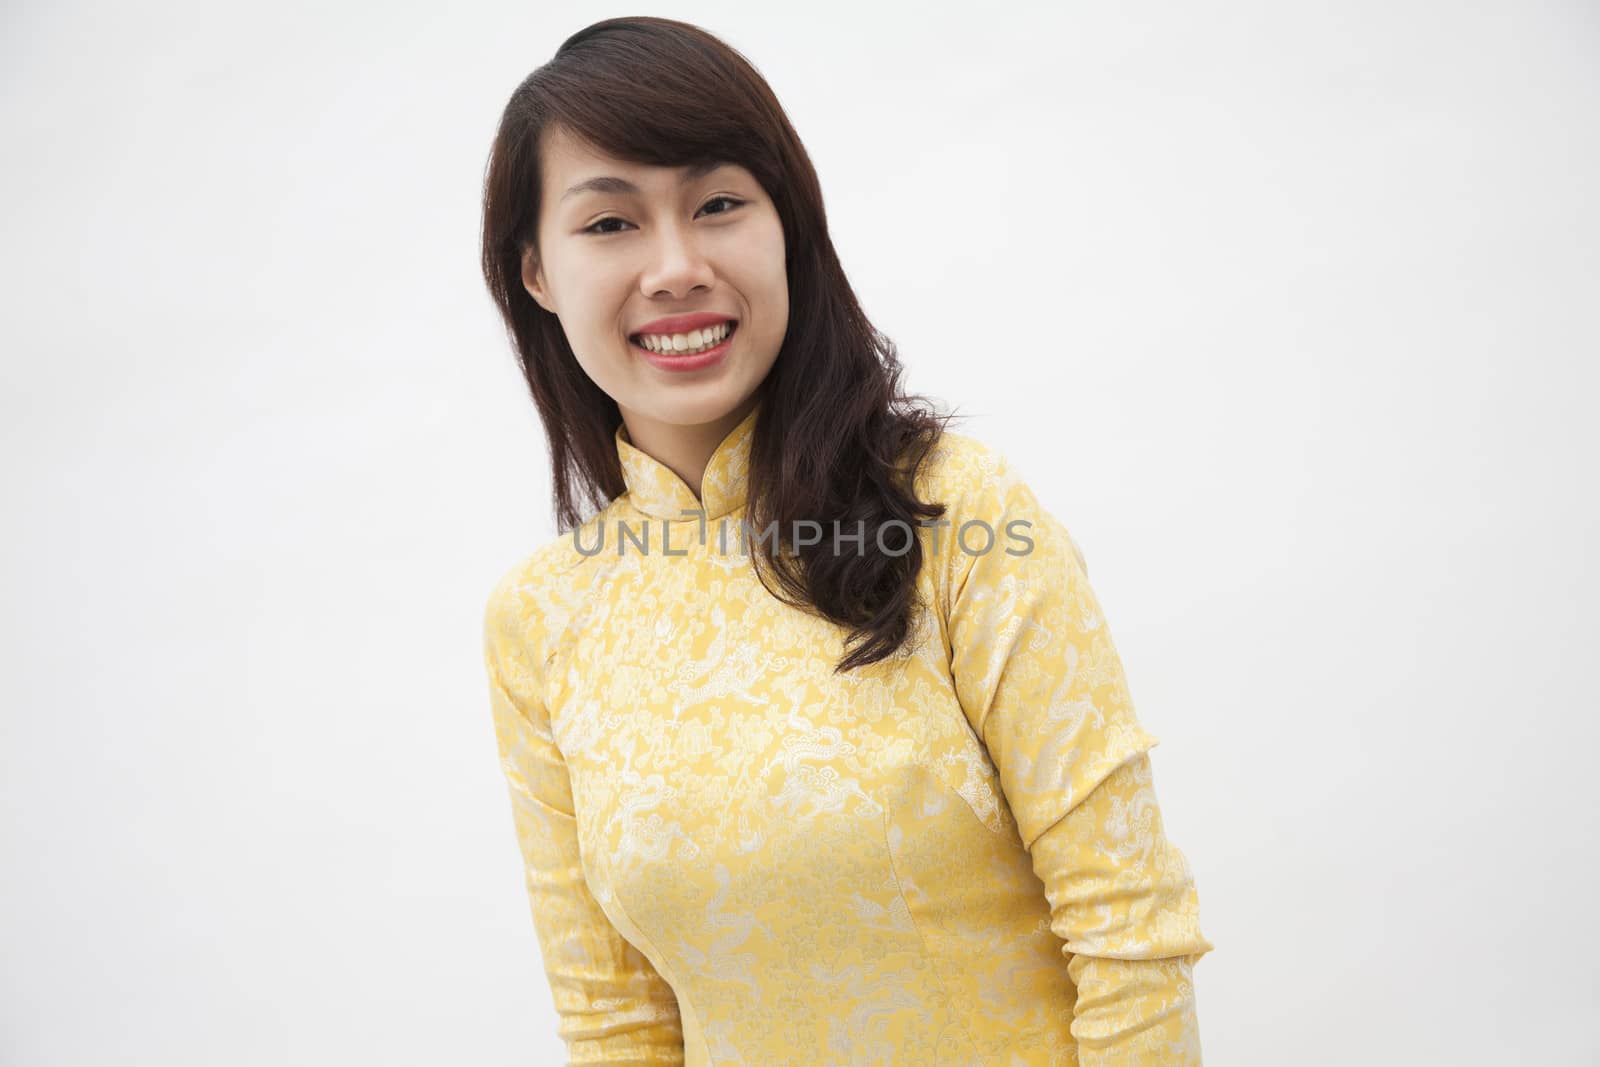 Portrait of smiling young woman wearing a yellow traditional dress from Vietnam, studio shot